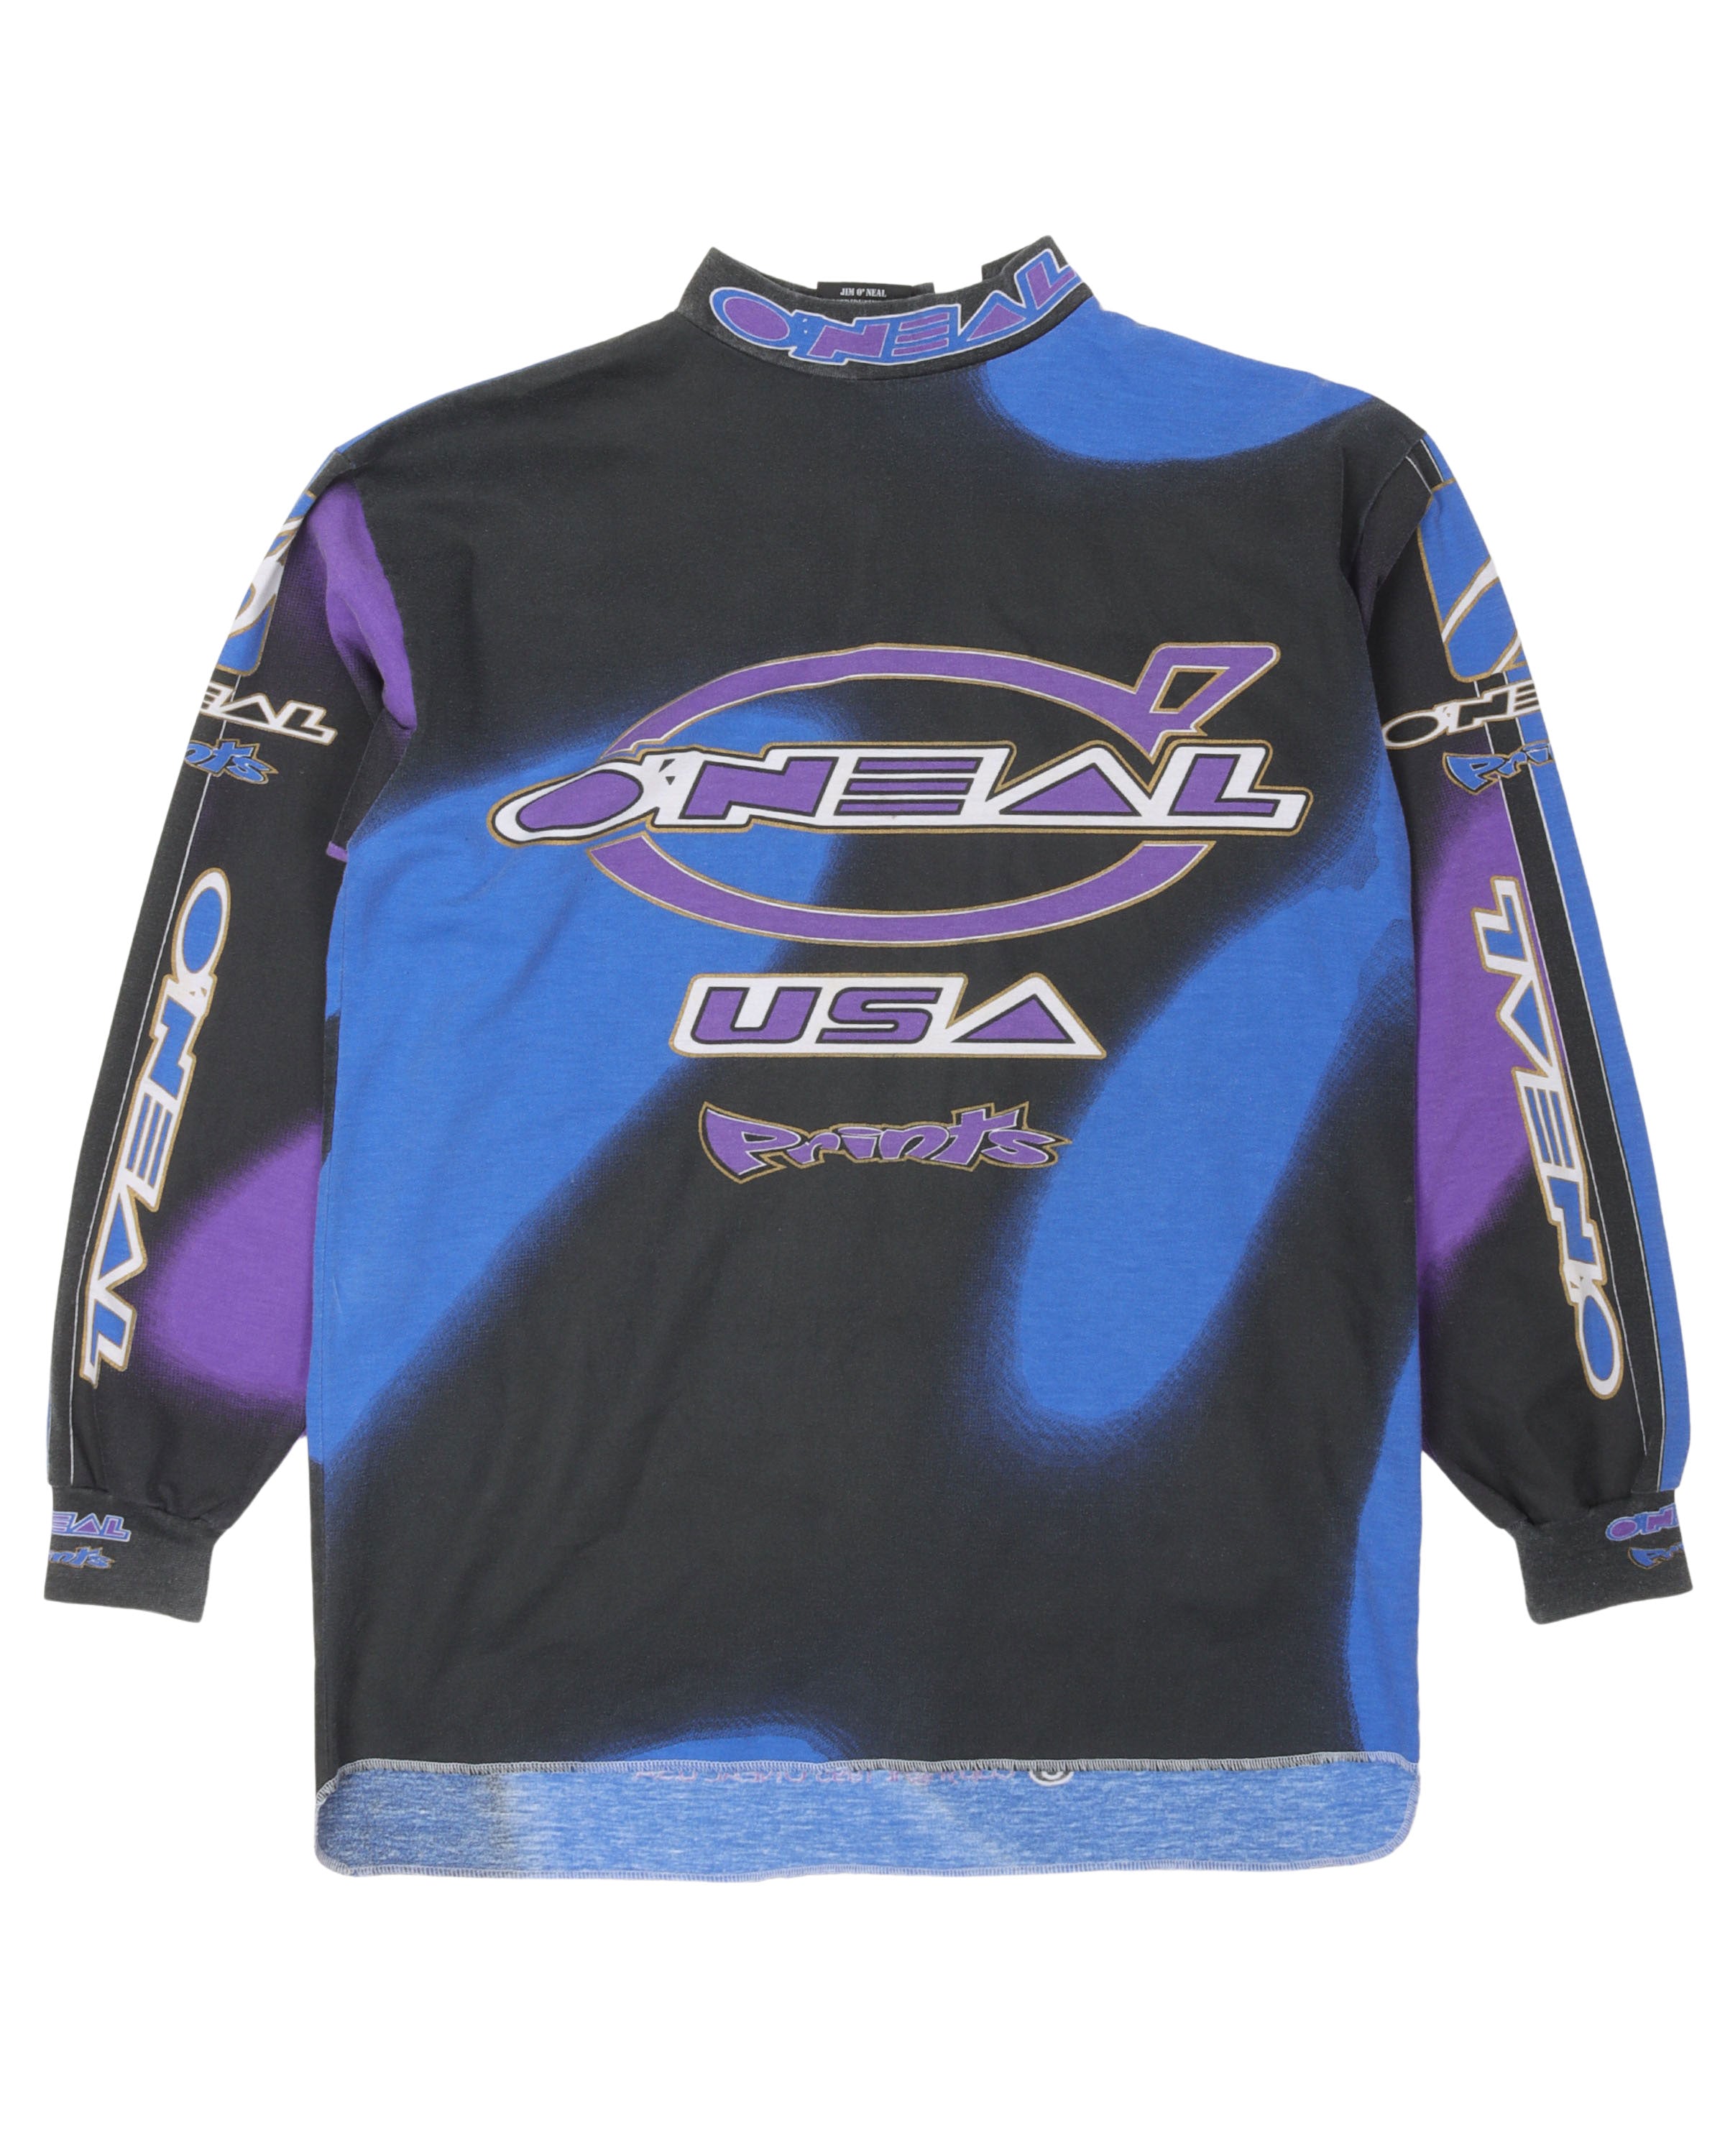 Vintage Oneal USA Prints Motocross Jersey